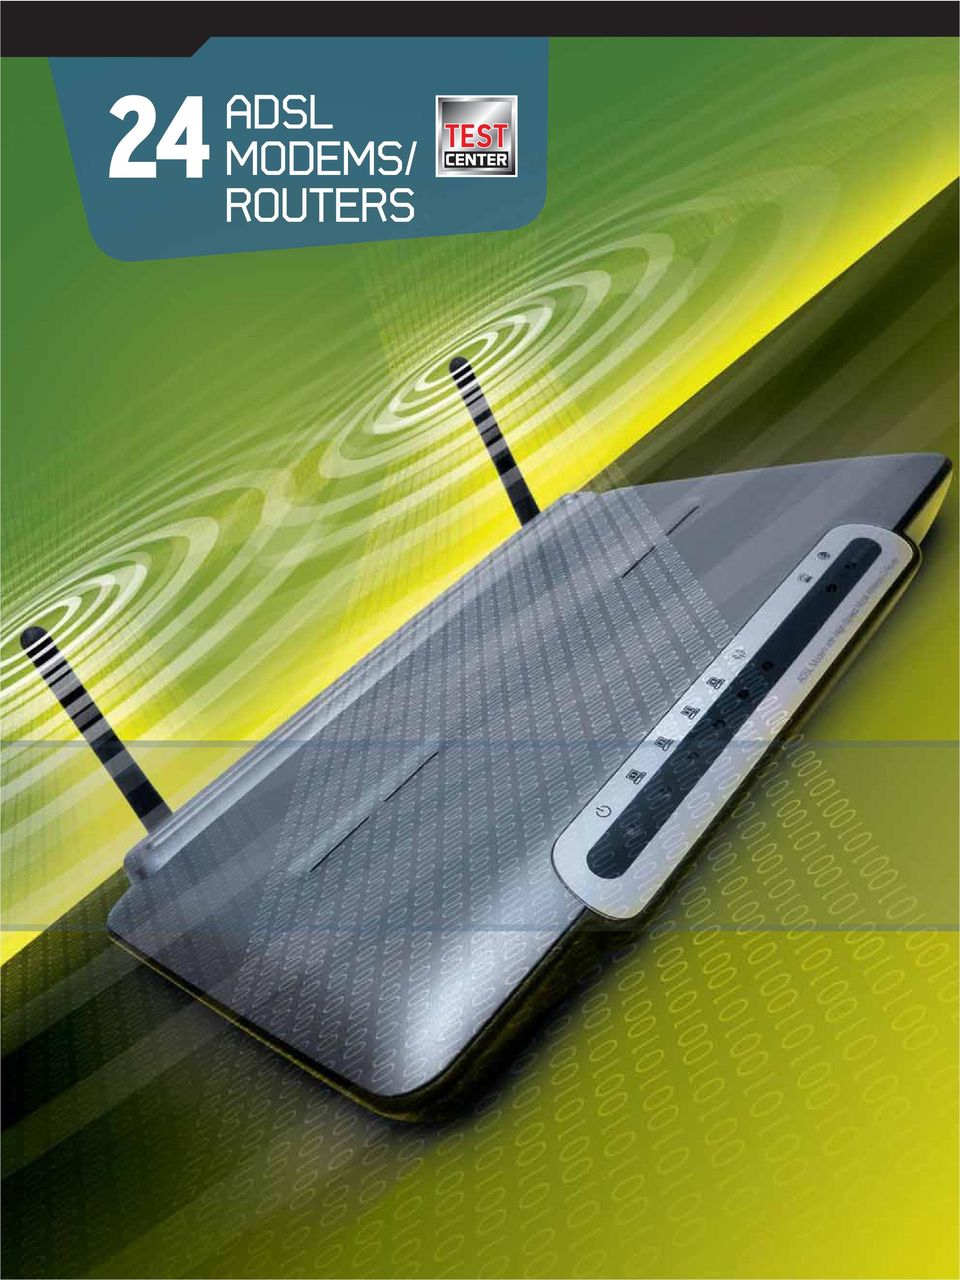 ROUTERS 104